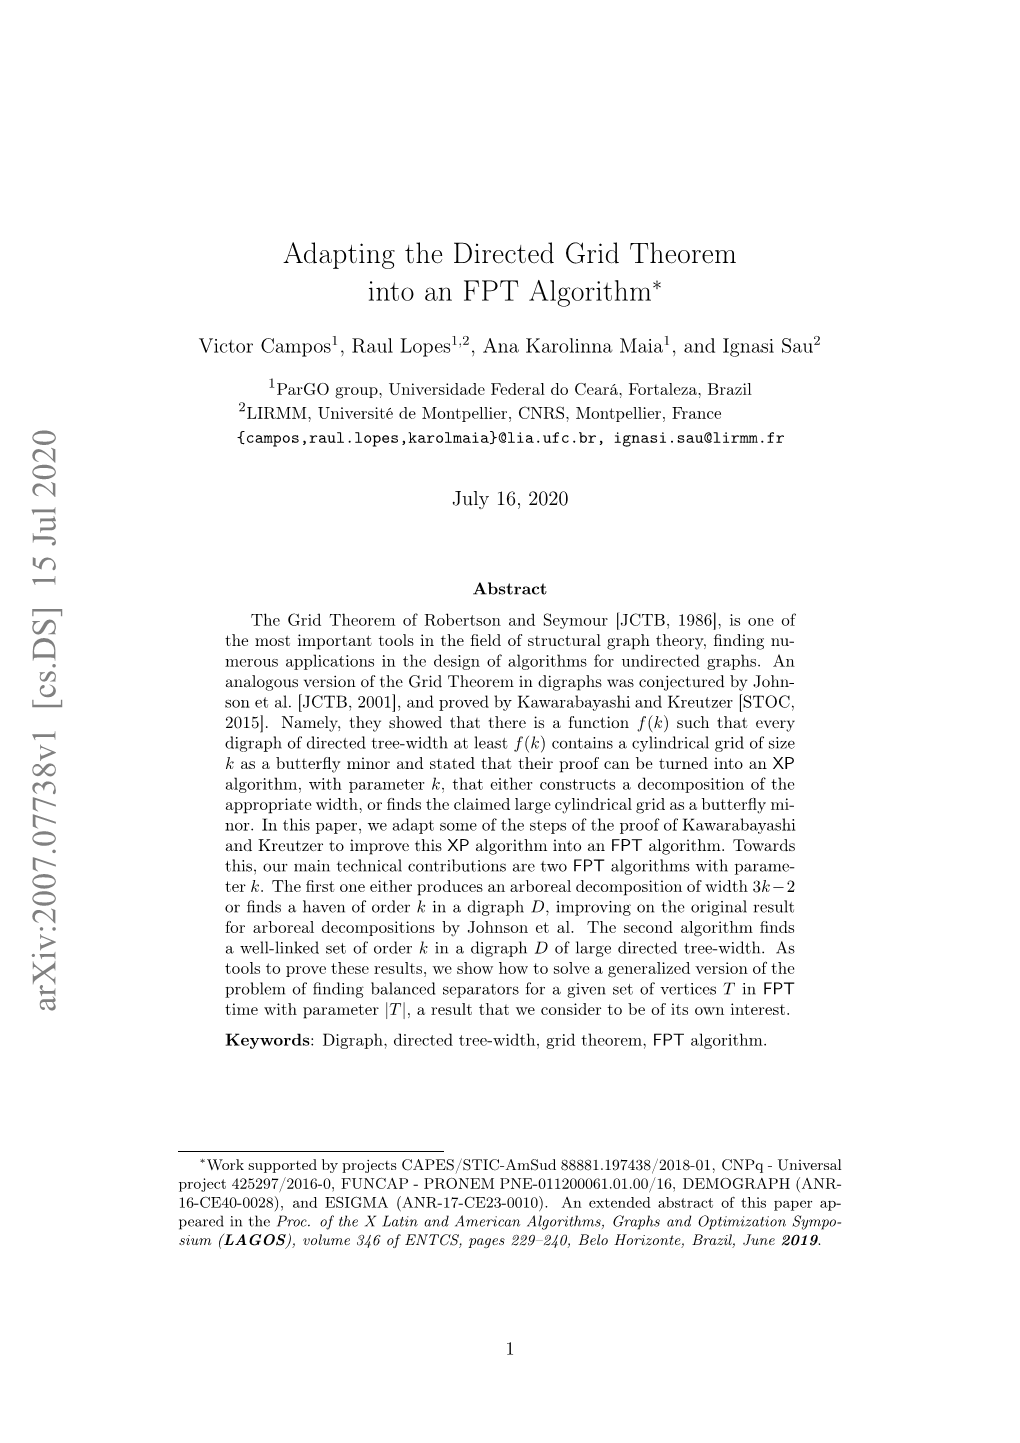 Adapting the Directed Grid Theorem Into an FPT Algorithm